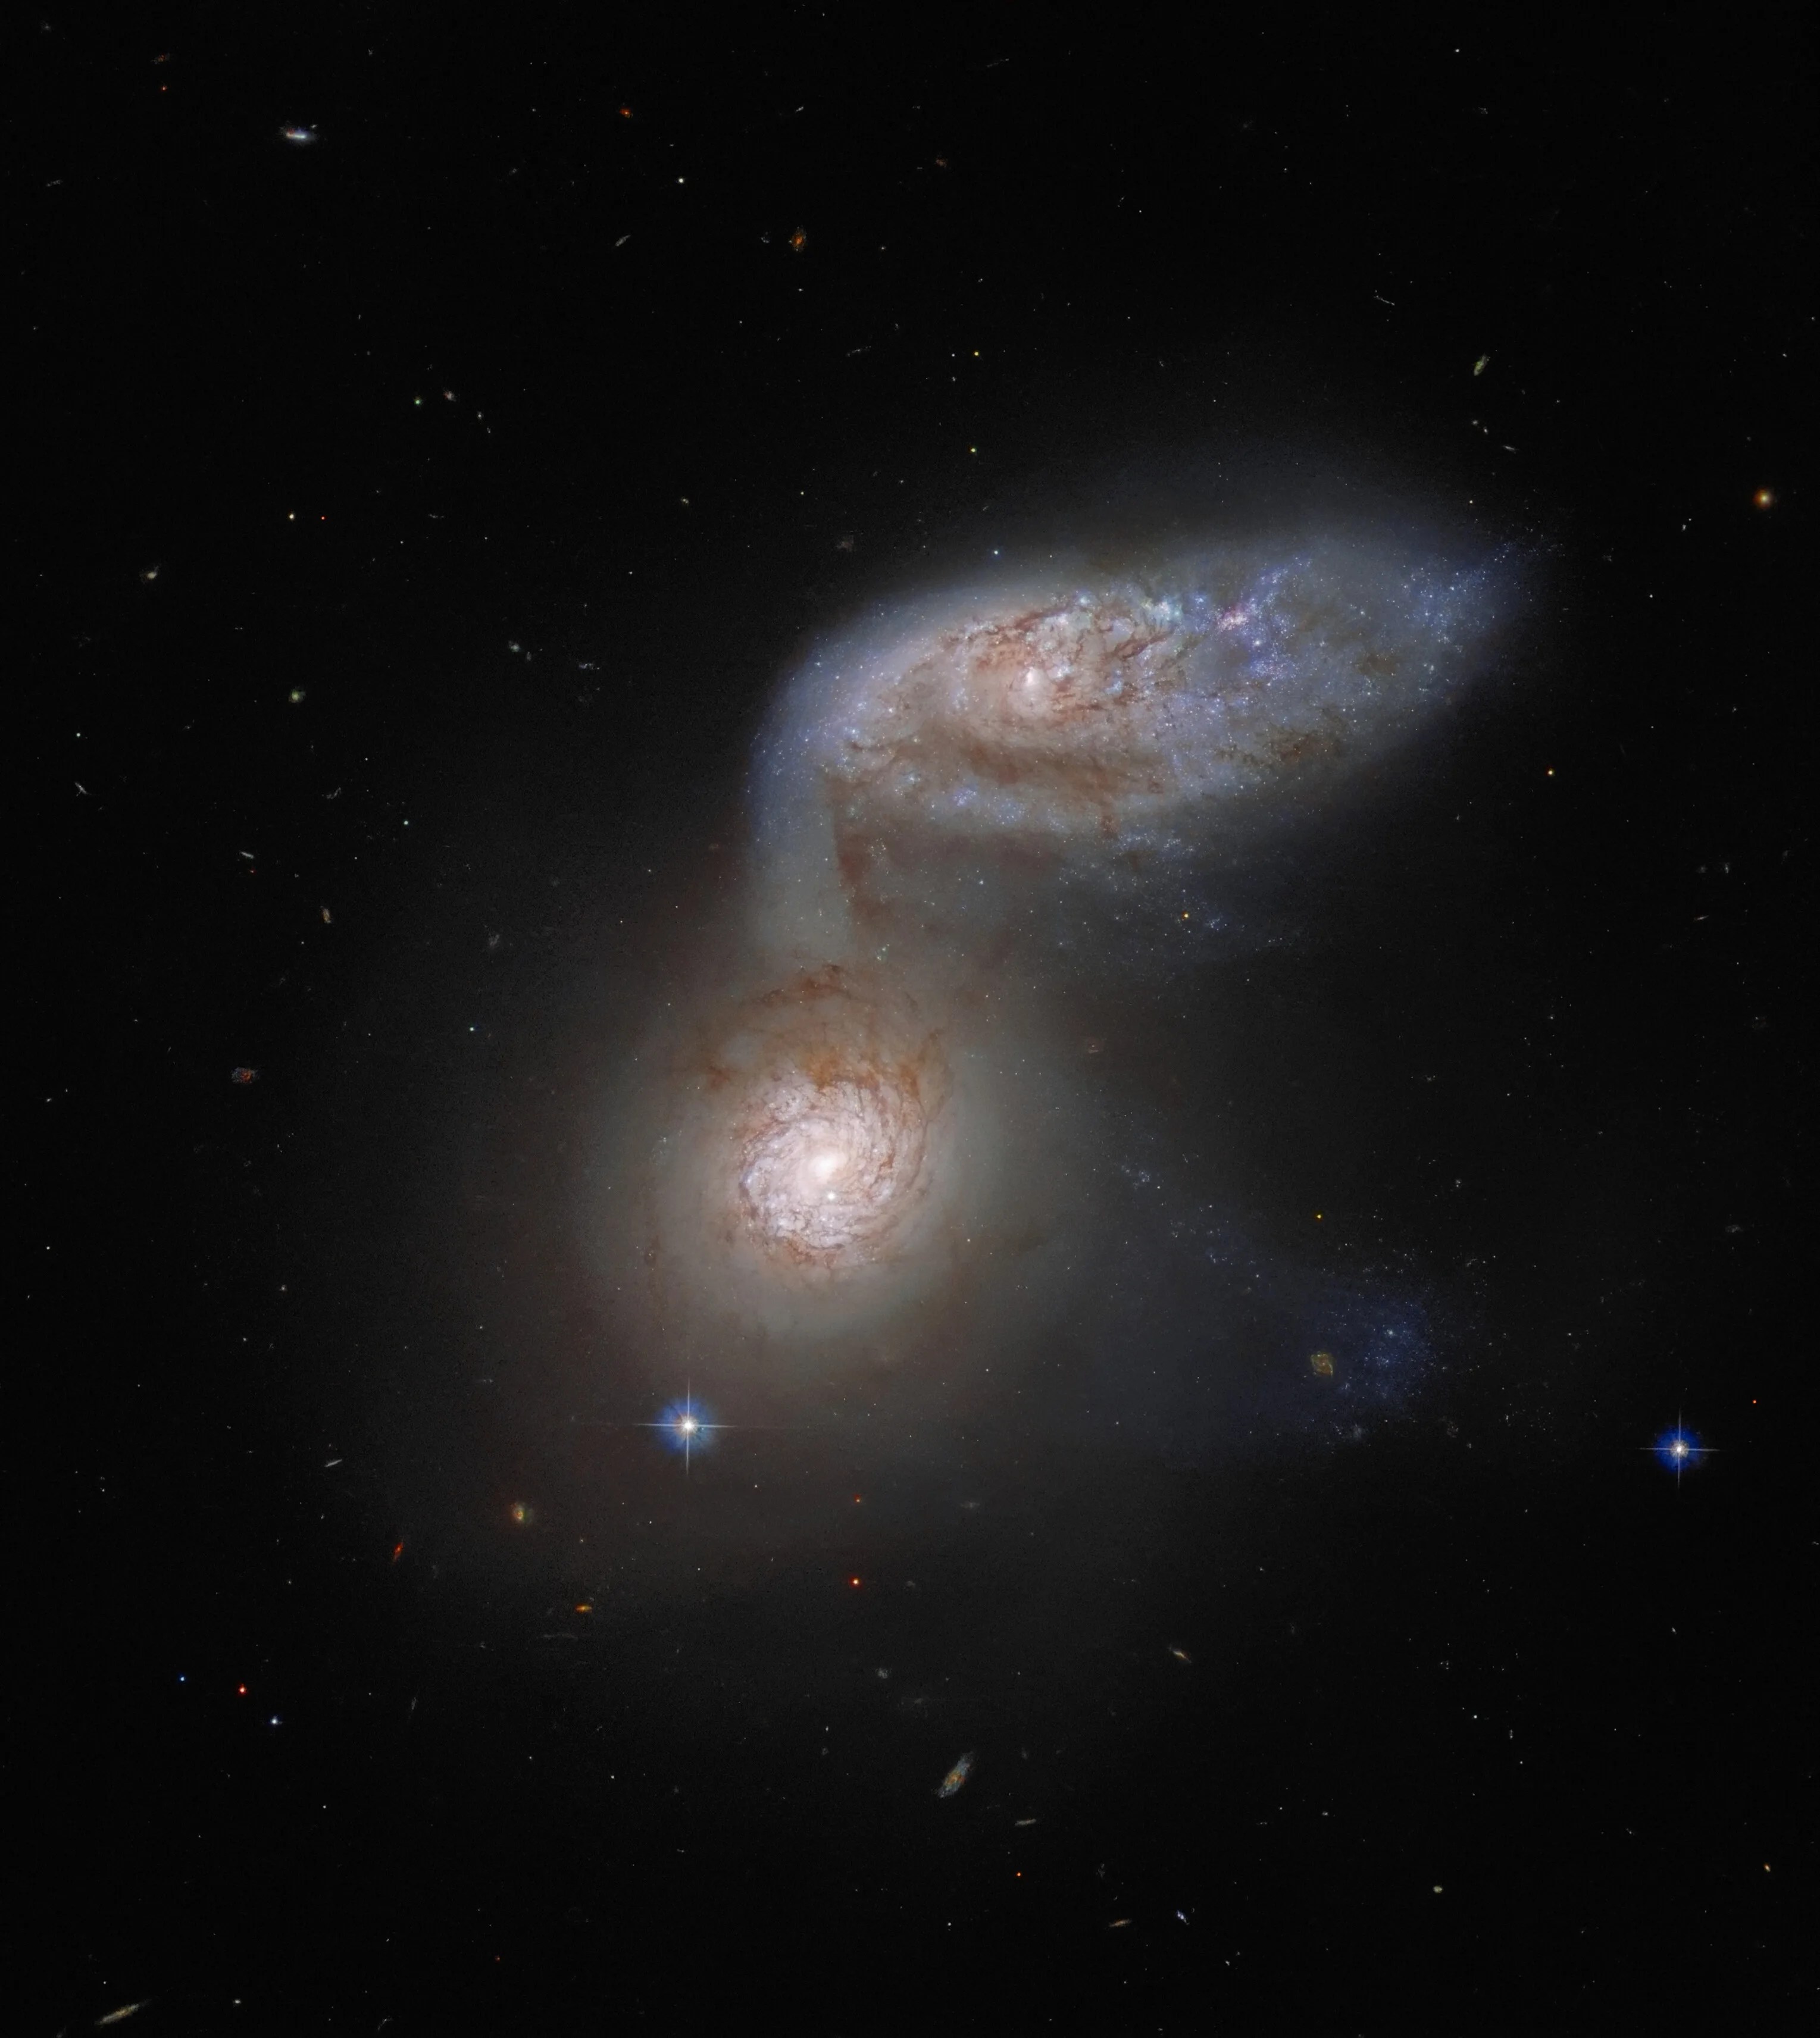 This nasa/esa hubble space telescope image features two interacting galaxies that are so intertwined, they have a collective name – arp 91. their delicate galactic dance takes place more than 100 million light-years from earth.